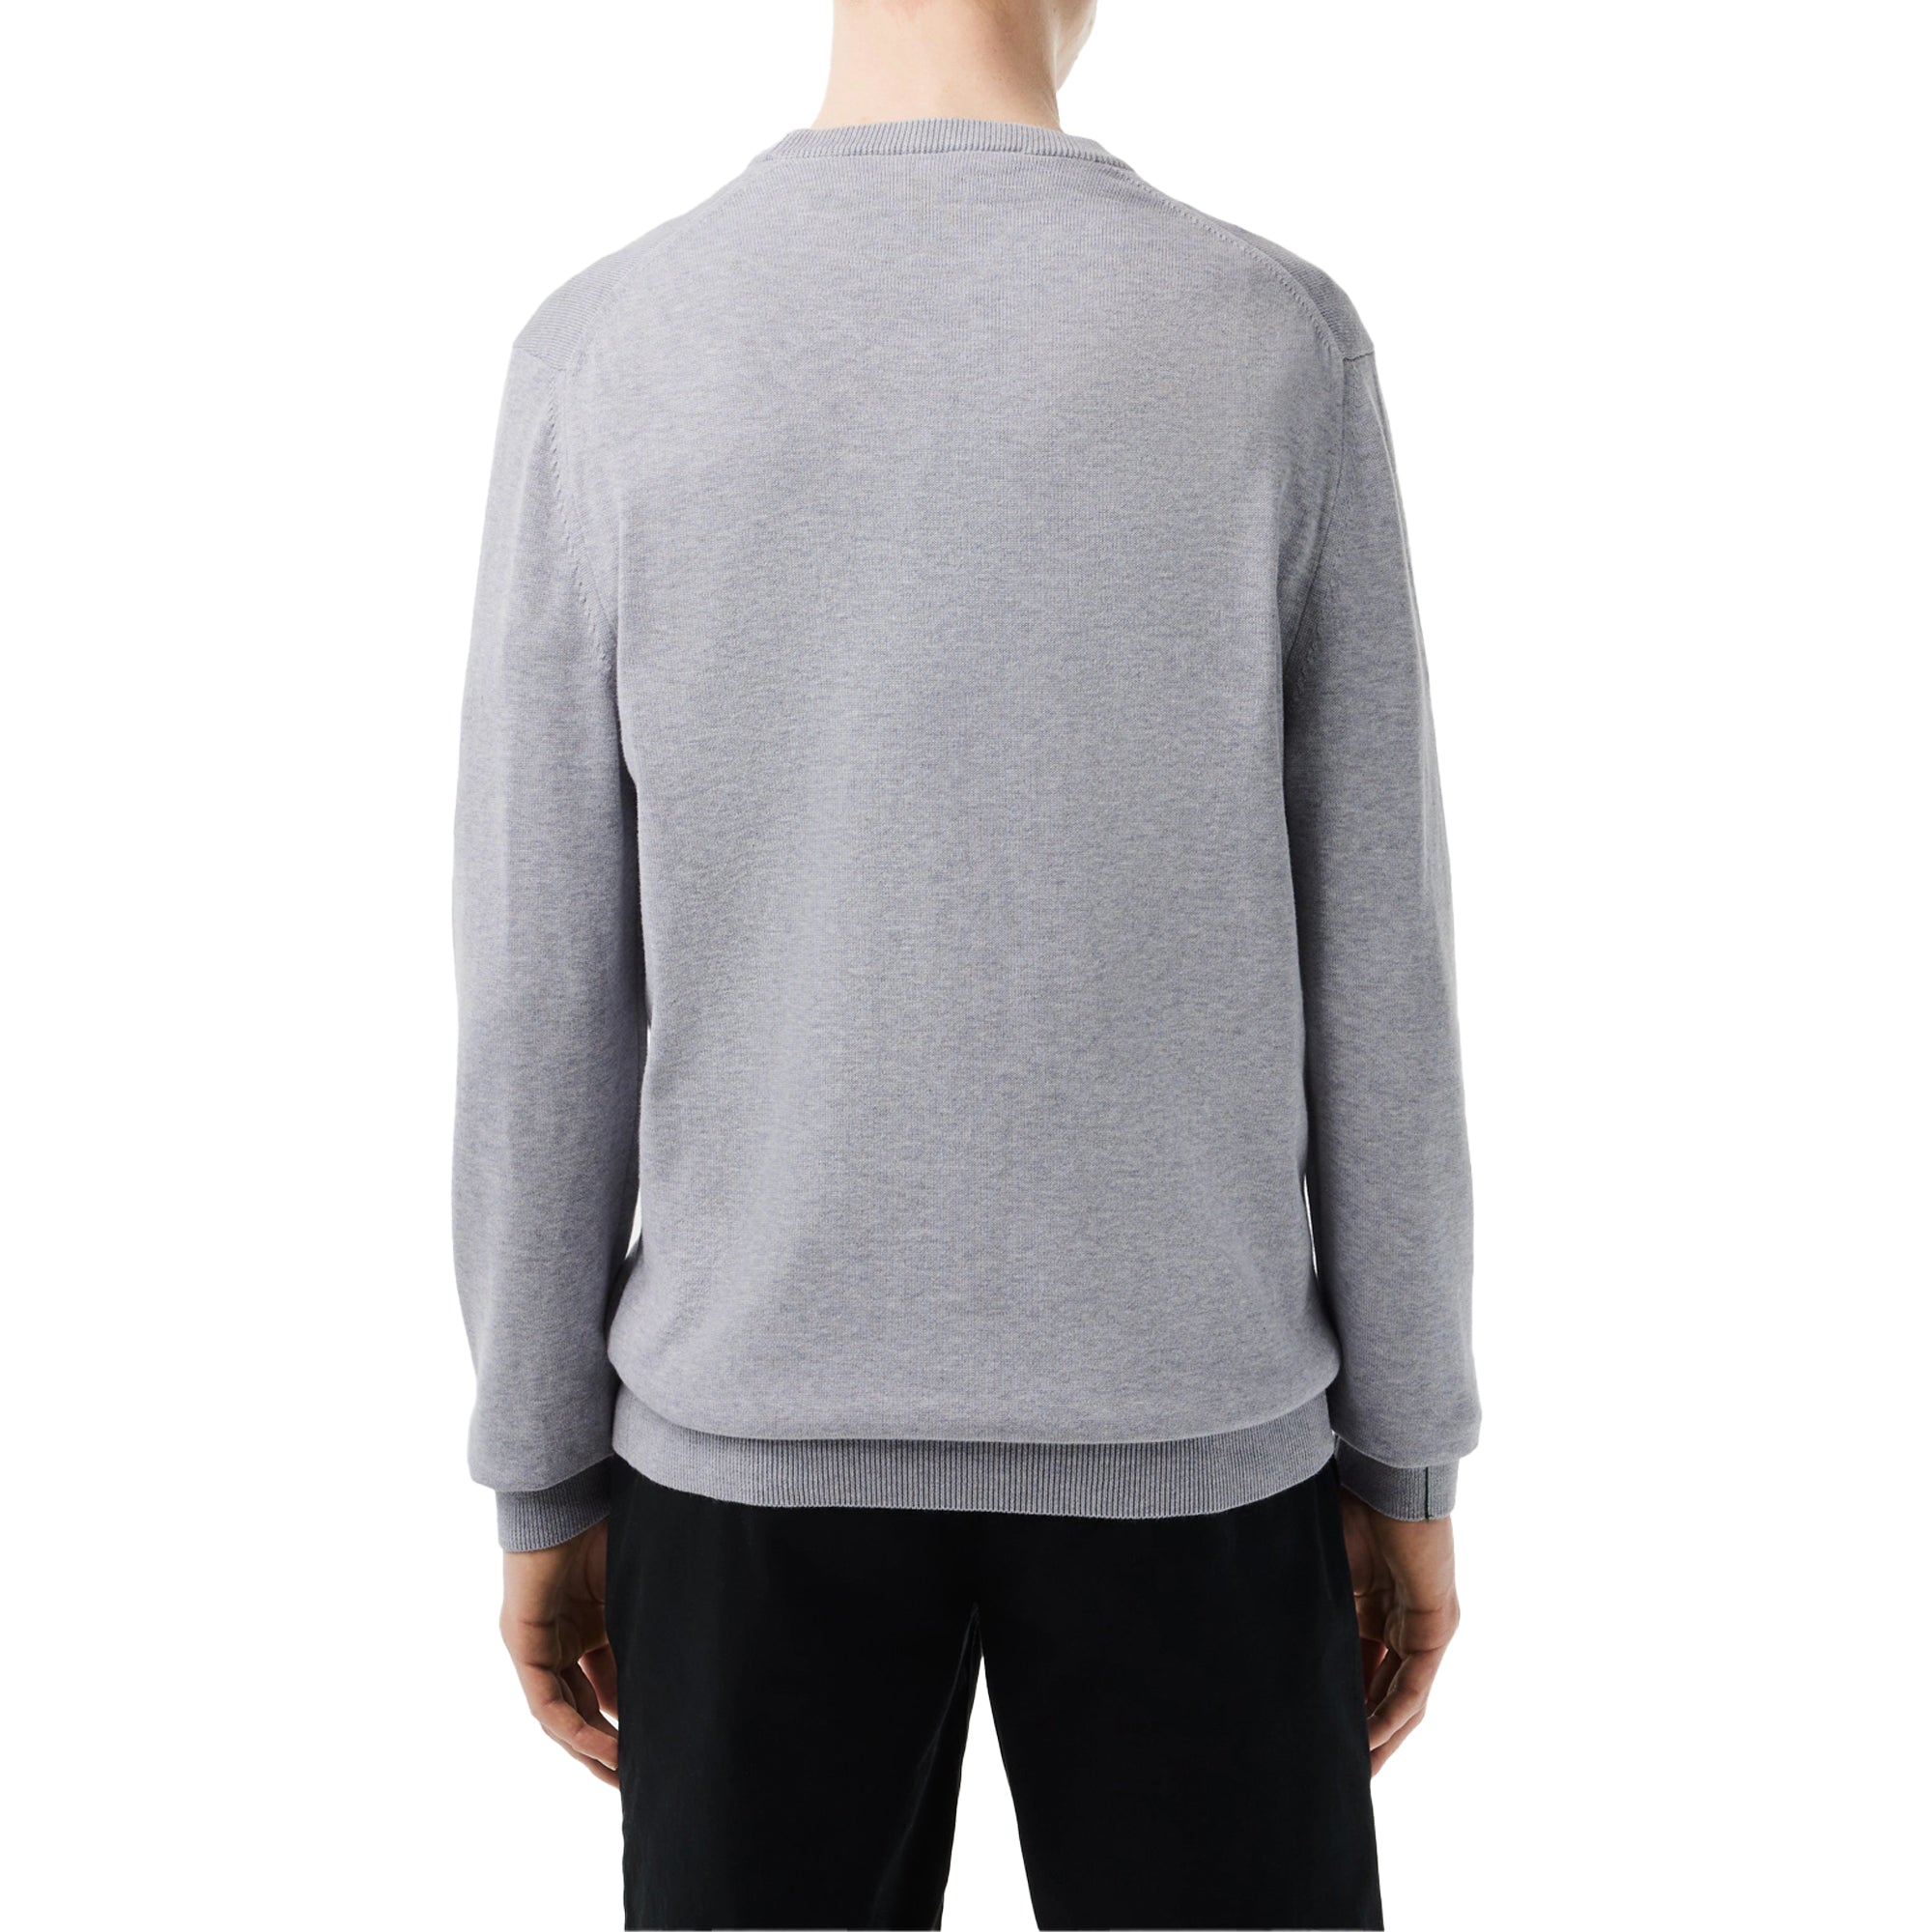 Lacoste New Cotton Crew Knit AH1985 - Silver Grey